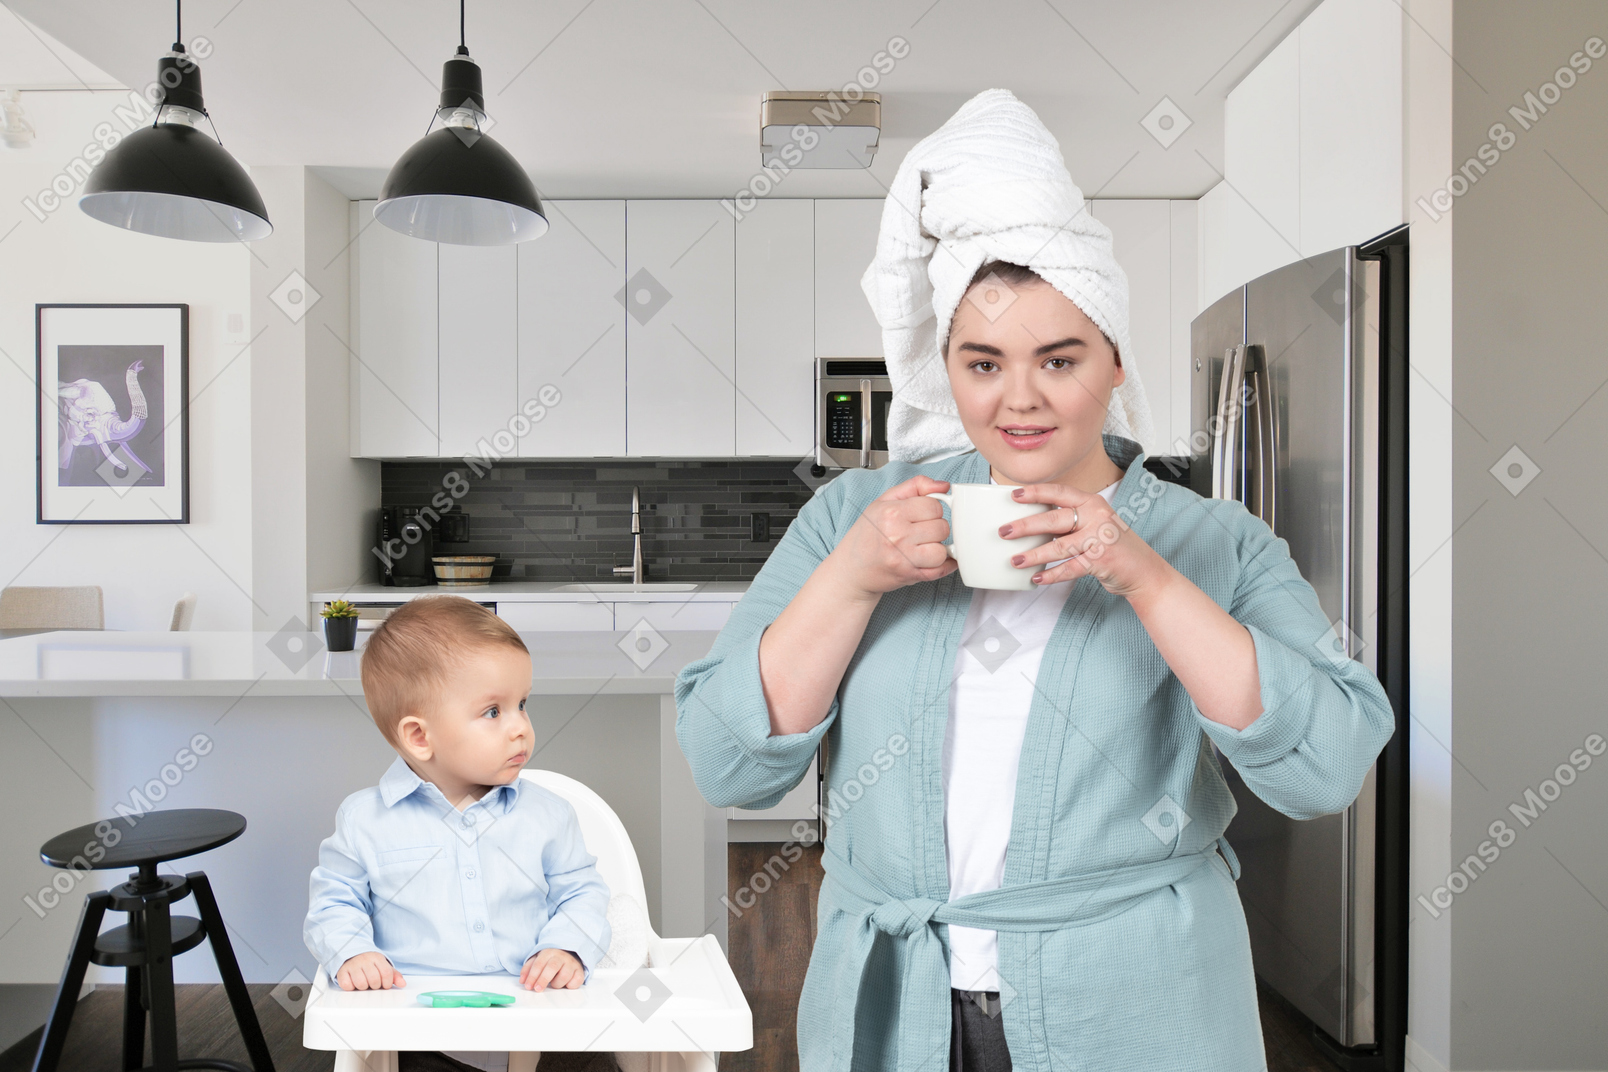 Woman with towel on her head drinking from cup while her baby sitting next to her